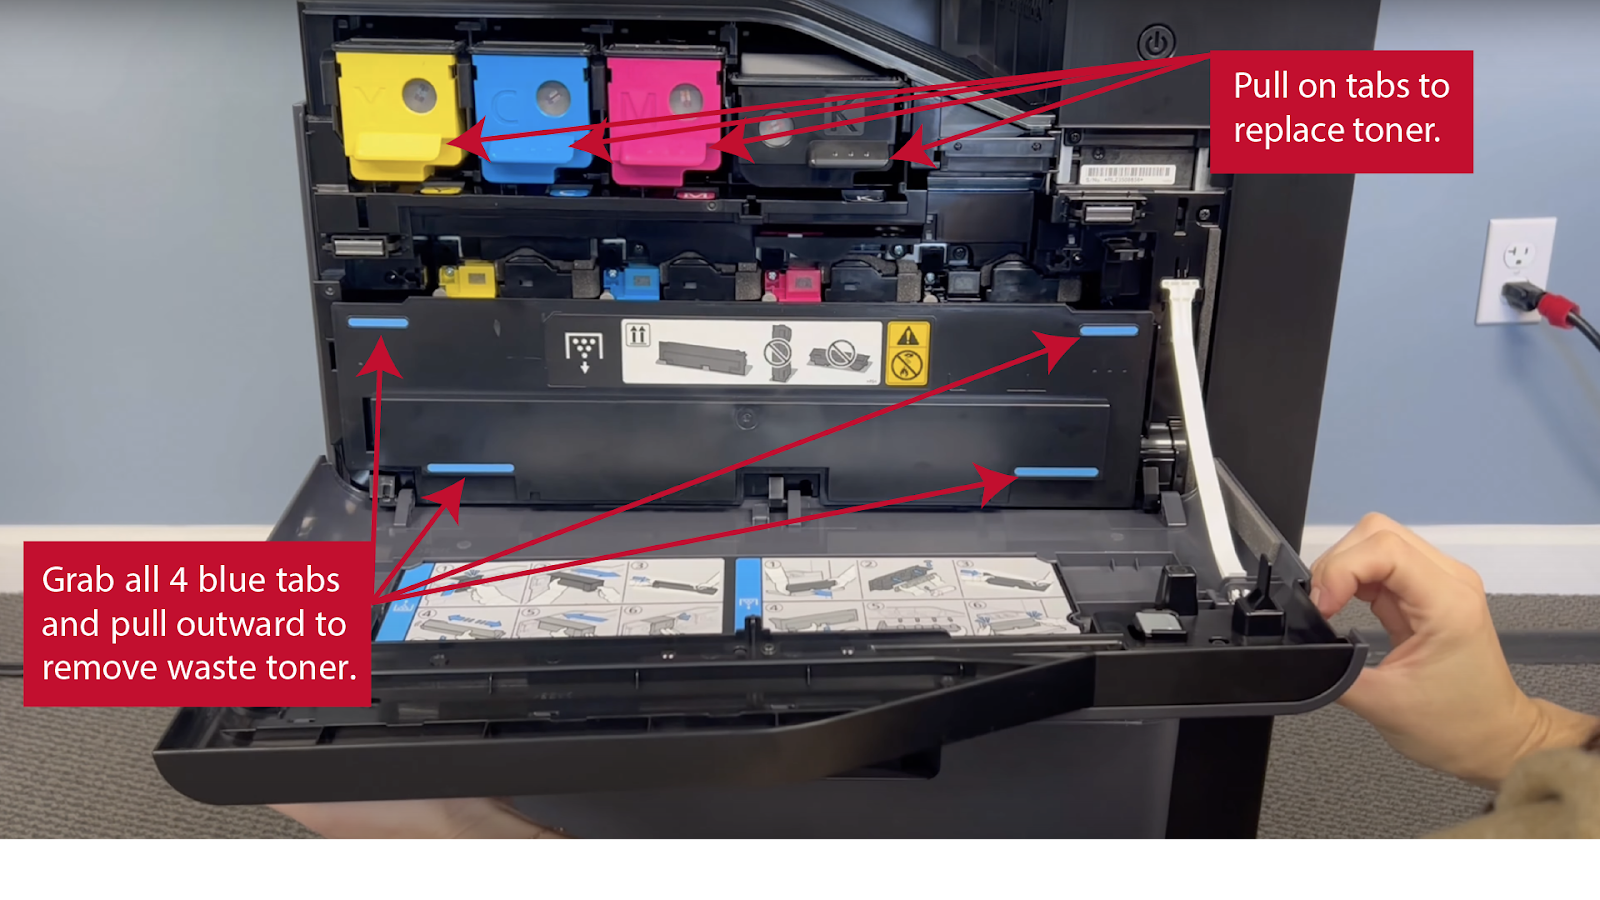 Pull on tabs to replace toner